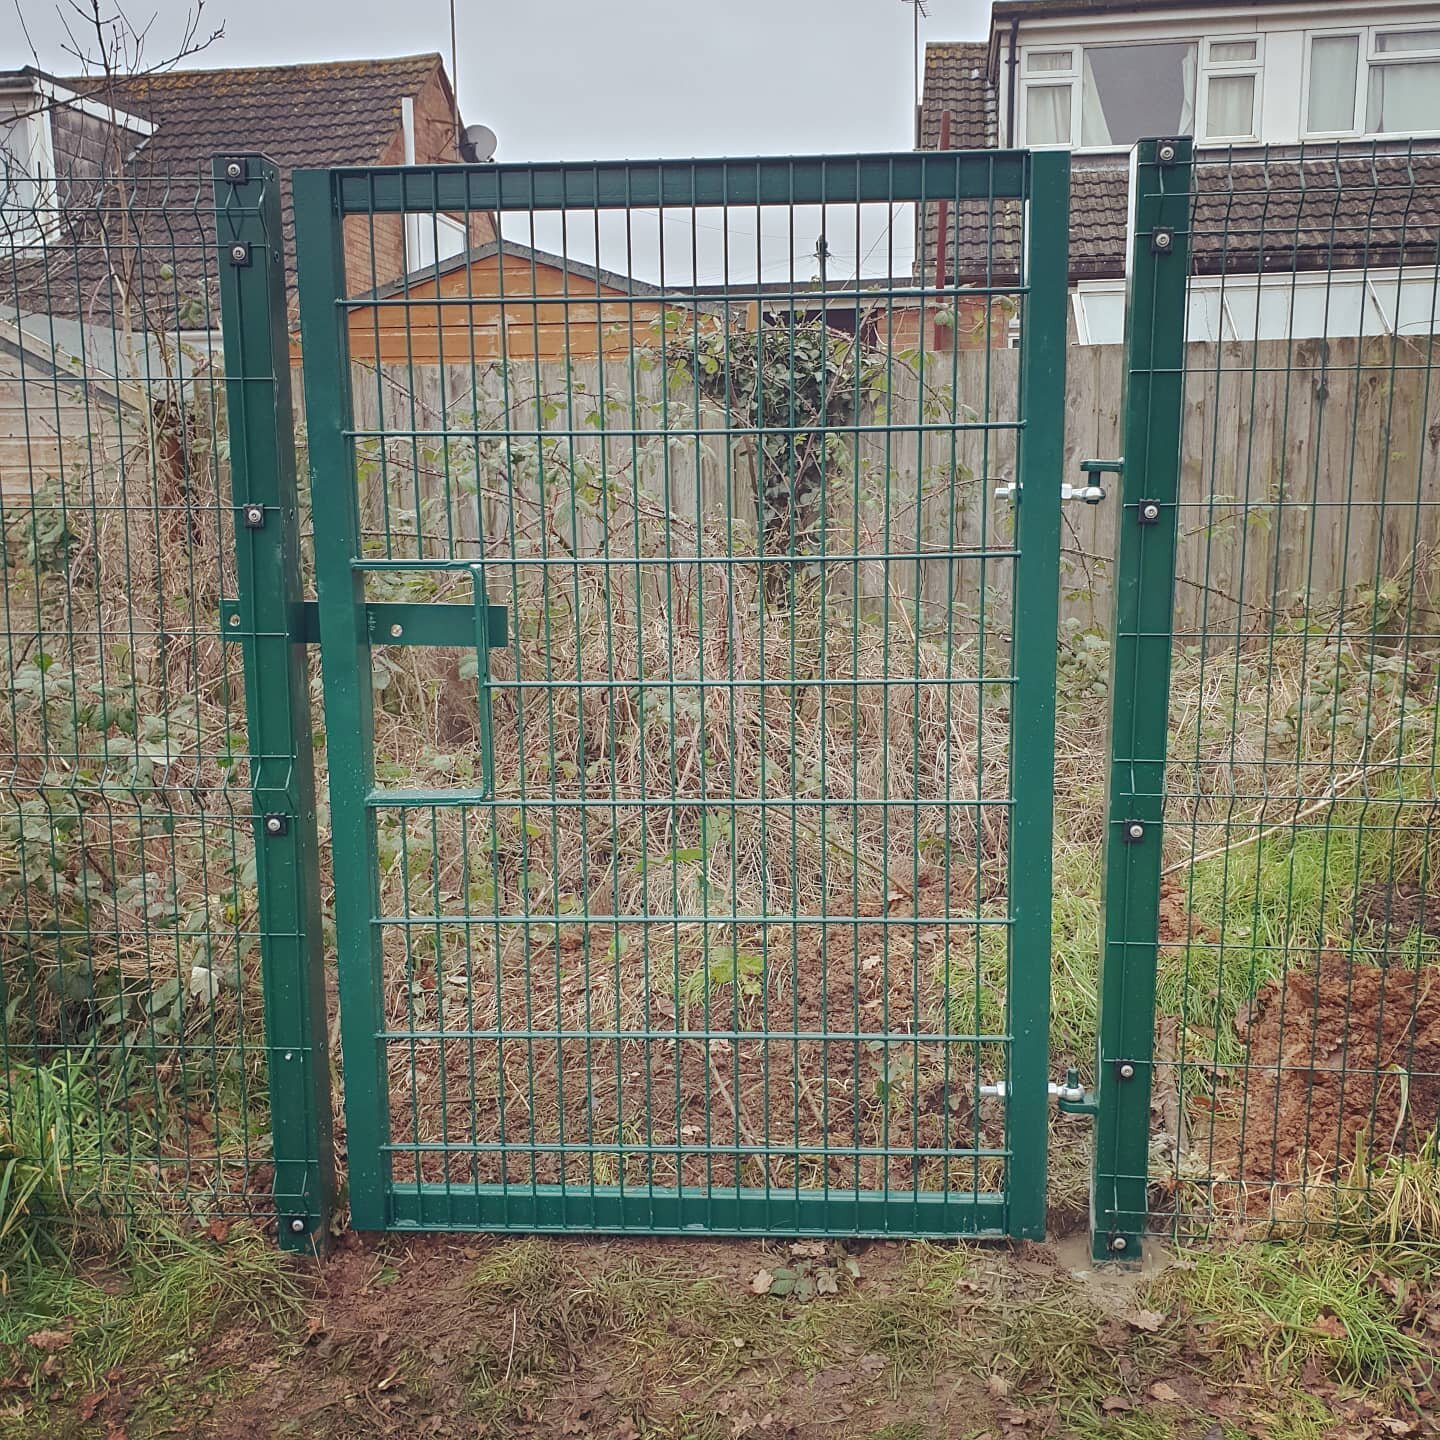 6ft V-mesh security gate providing security but access when needed